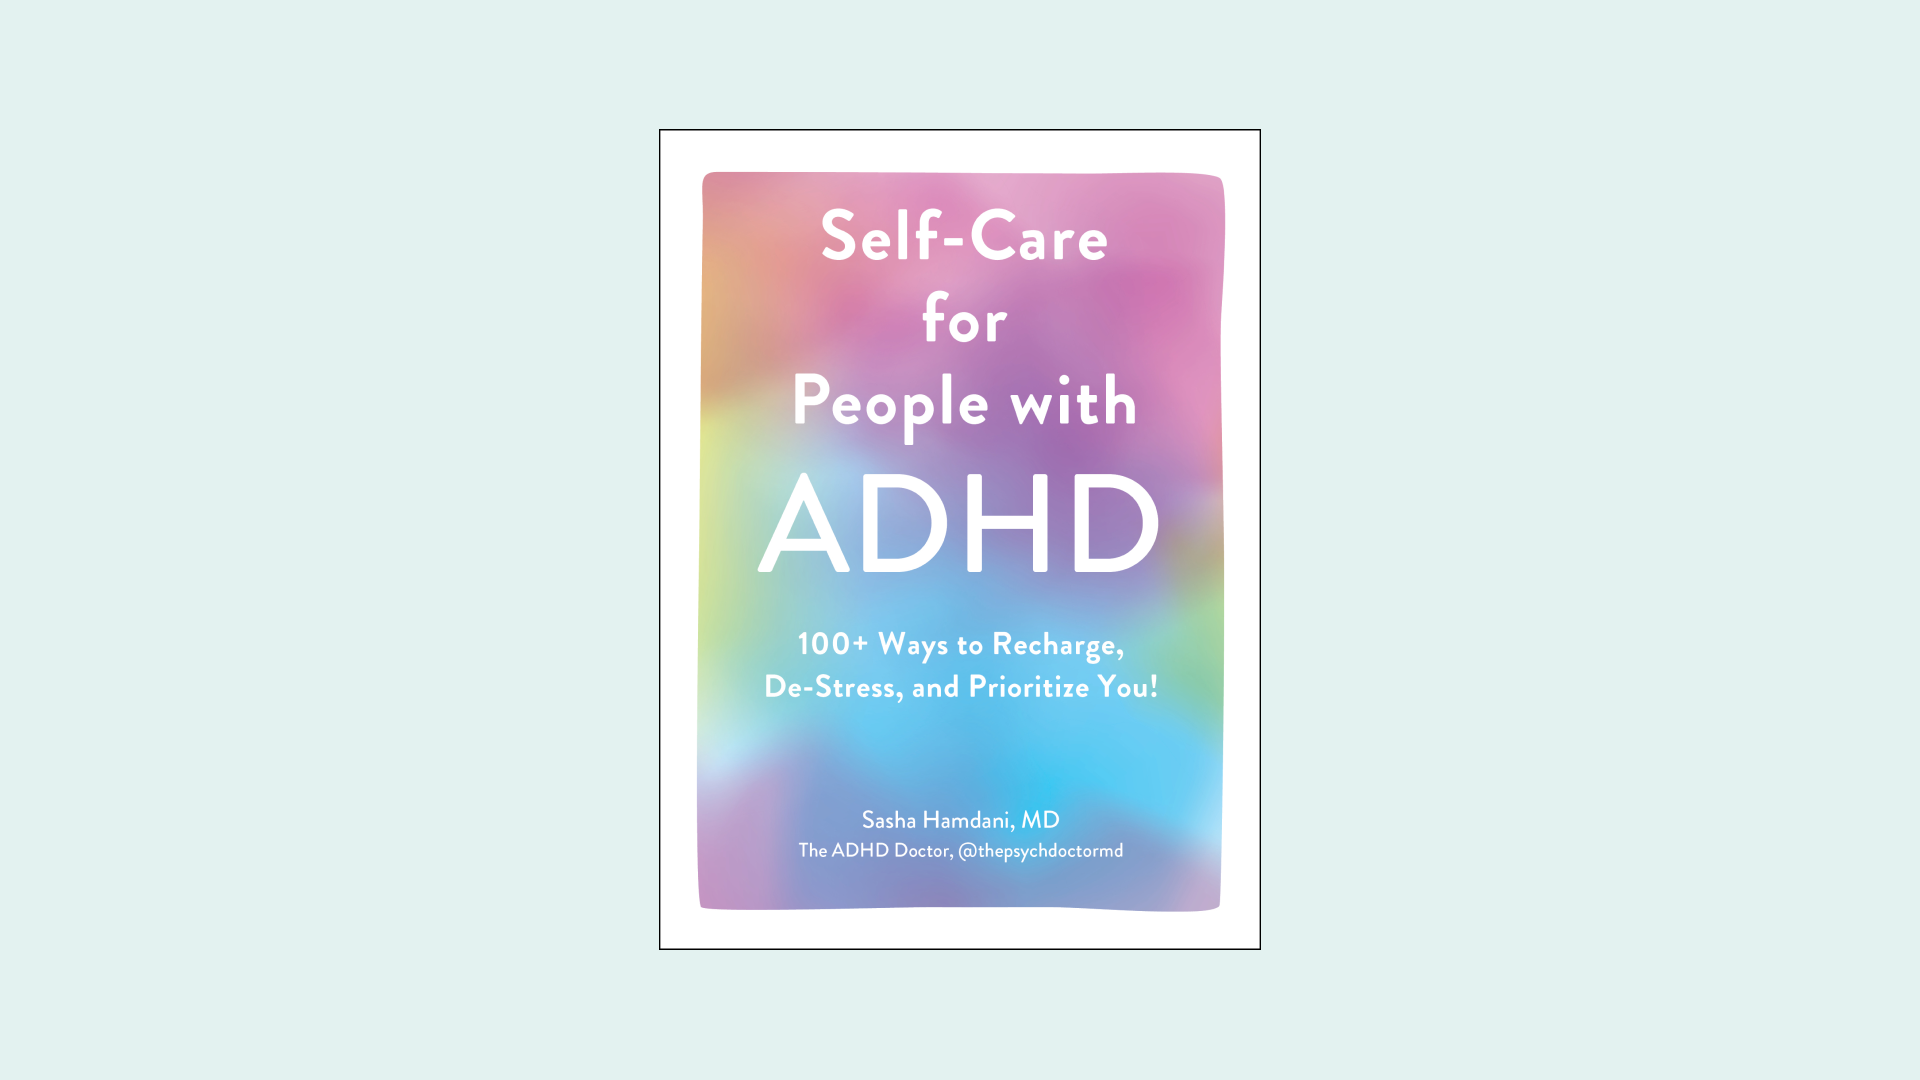 Cover of book "Self Care For People with ADHD" by Sasha Hamdani